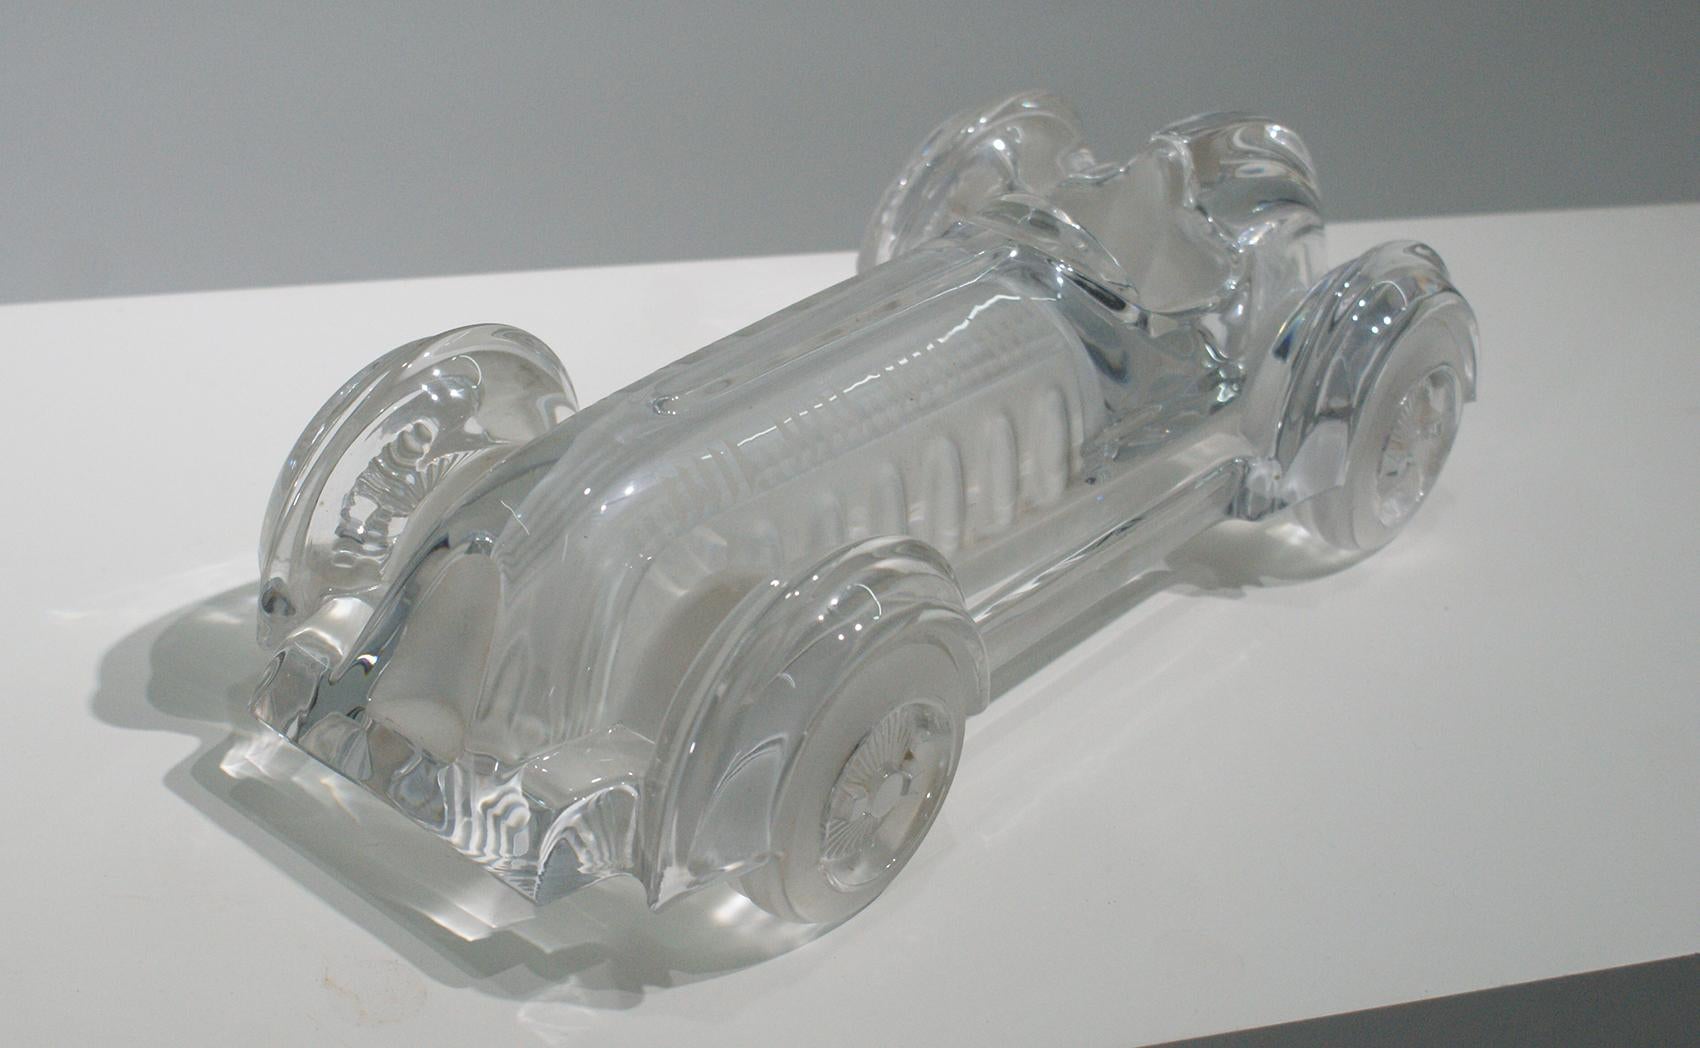 Signed Daum France, Crystal Sculpture of Vintage Race Car in Limited Edition 1